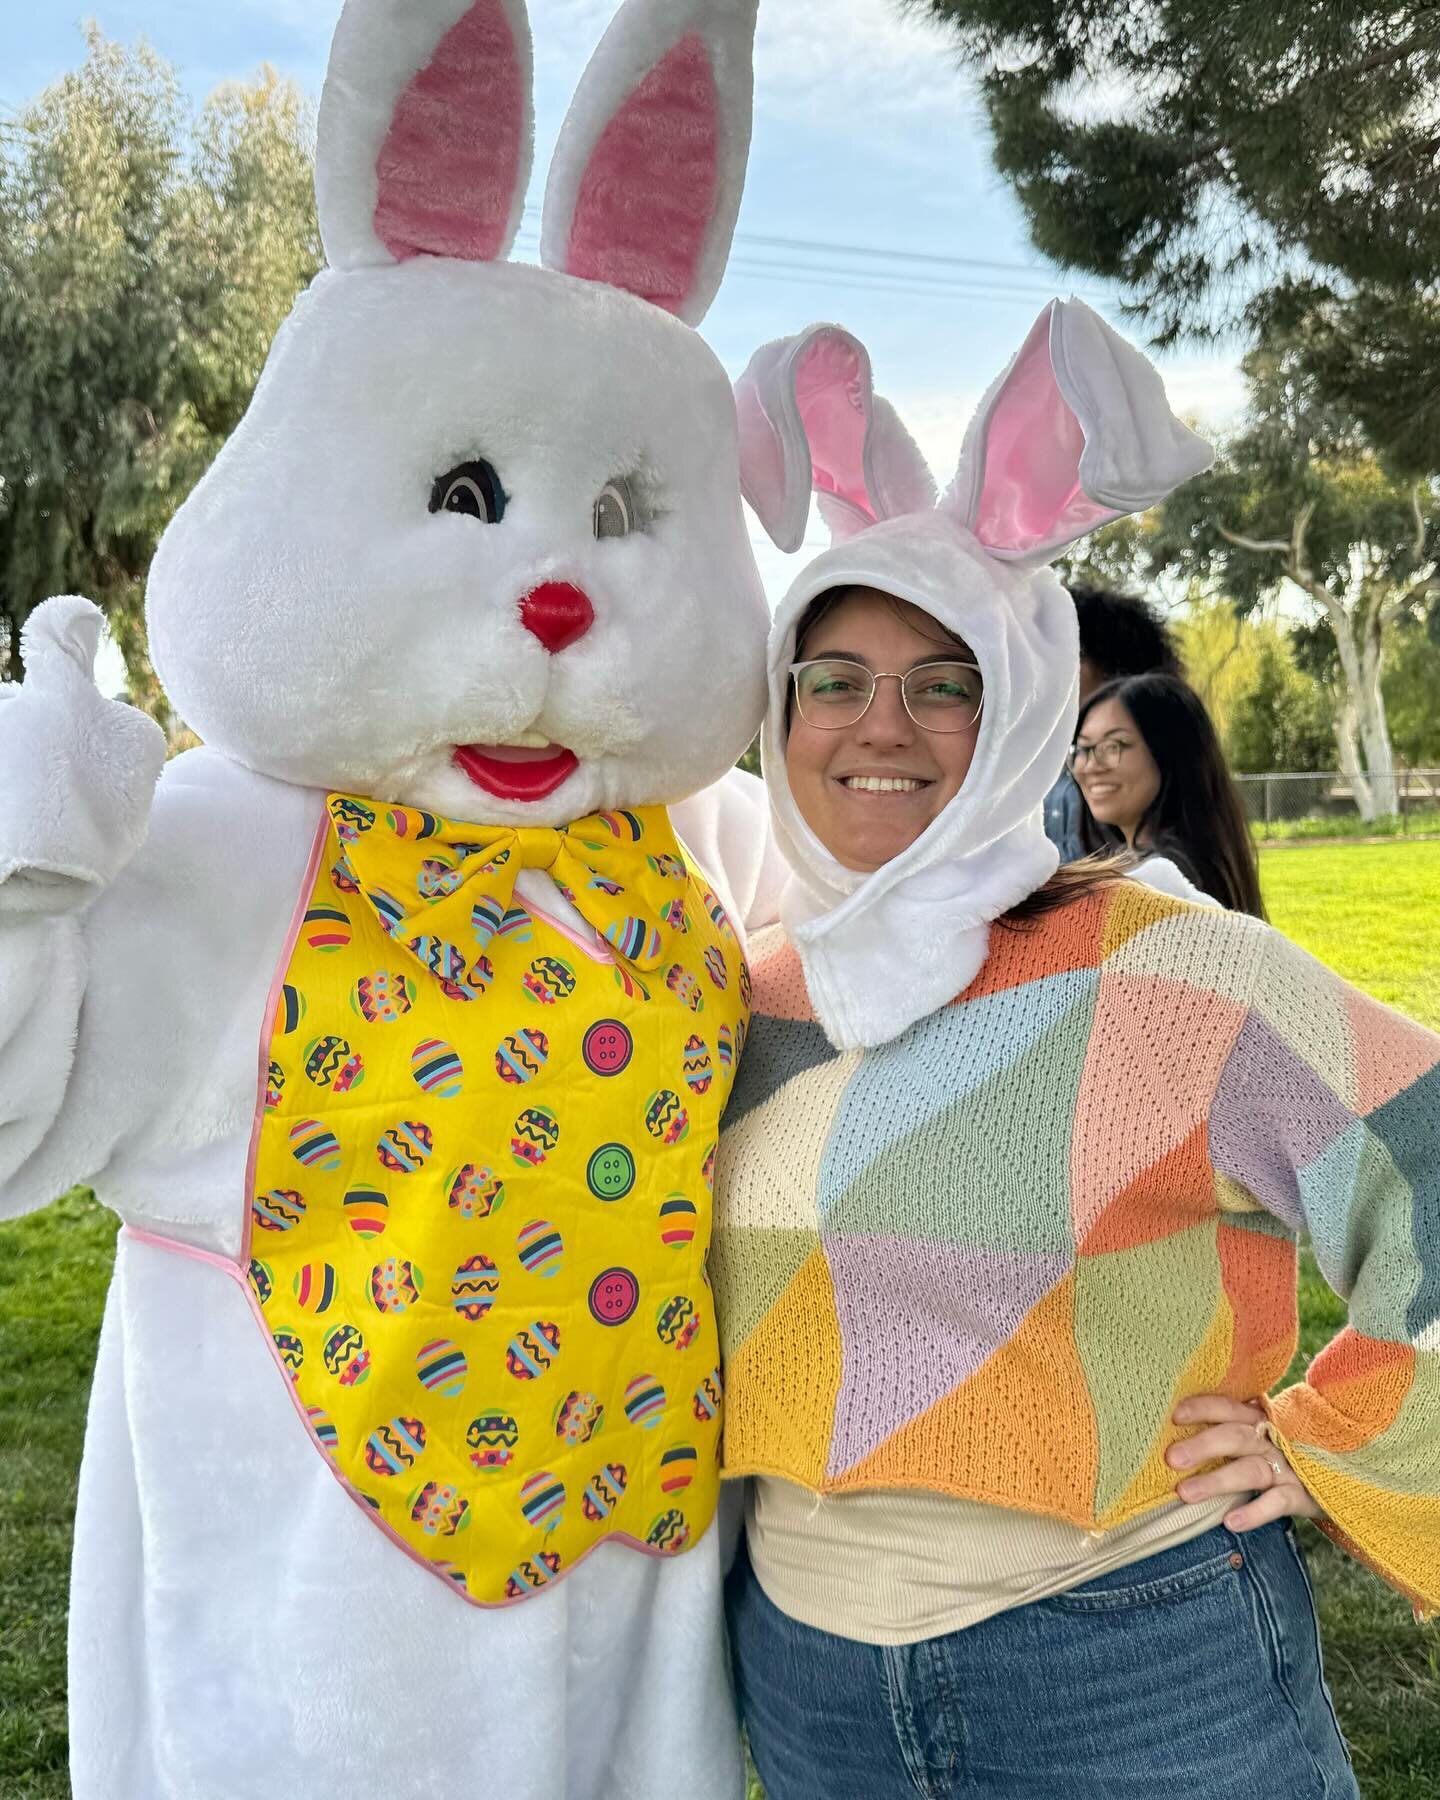 We hope you all had a great Easter yesterday! Our San Mateo office celebrated by hosting their annual Easter egg hunt, with the Easter bunny! Clients decorated easter bags, made easter bunny ears and other fun crafts, took pictures with the Easter bu